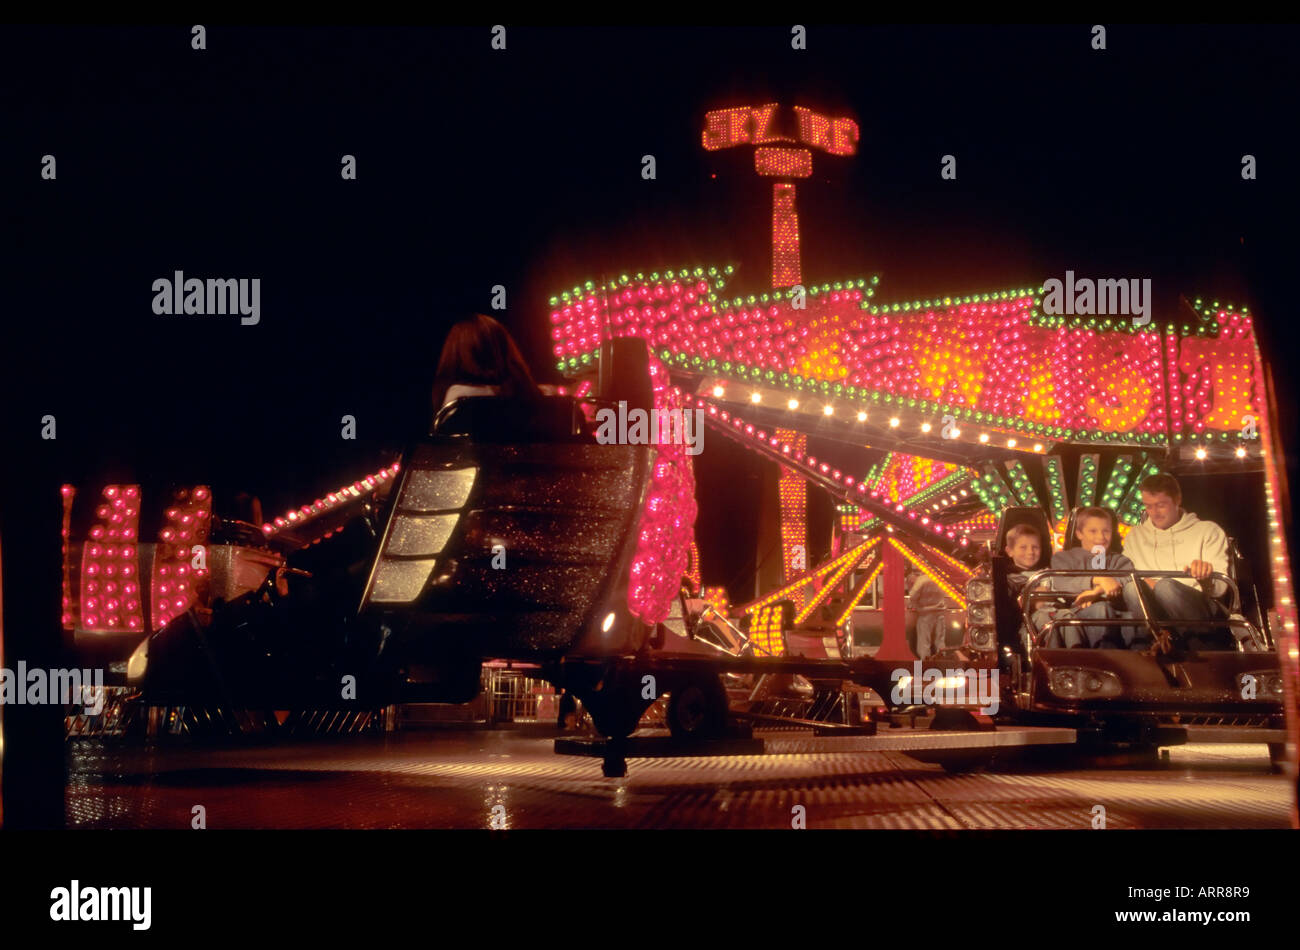 A man and two boys sitting in a fairground ride at night Stock Photo